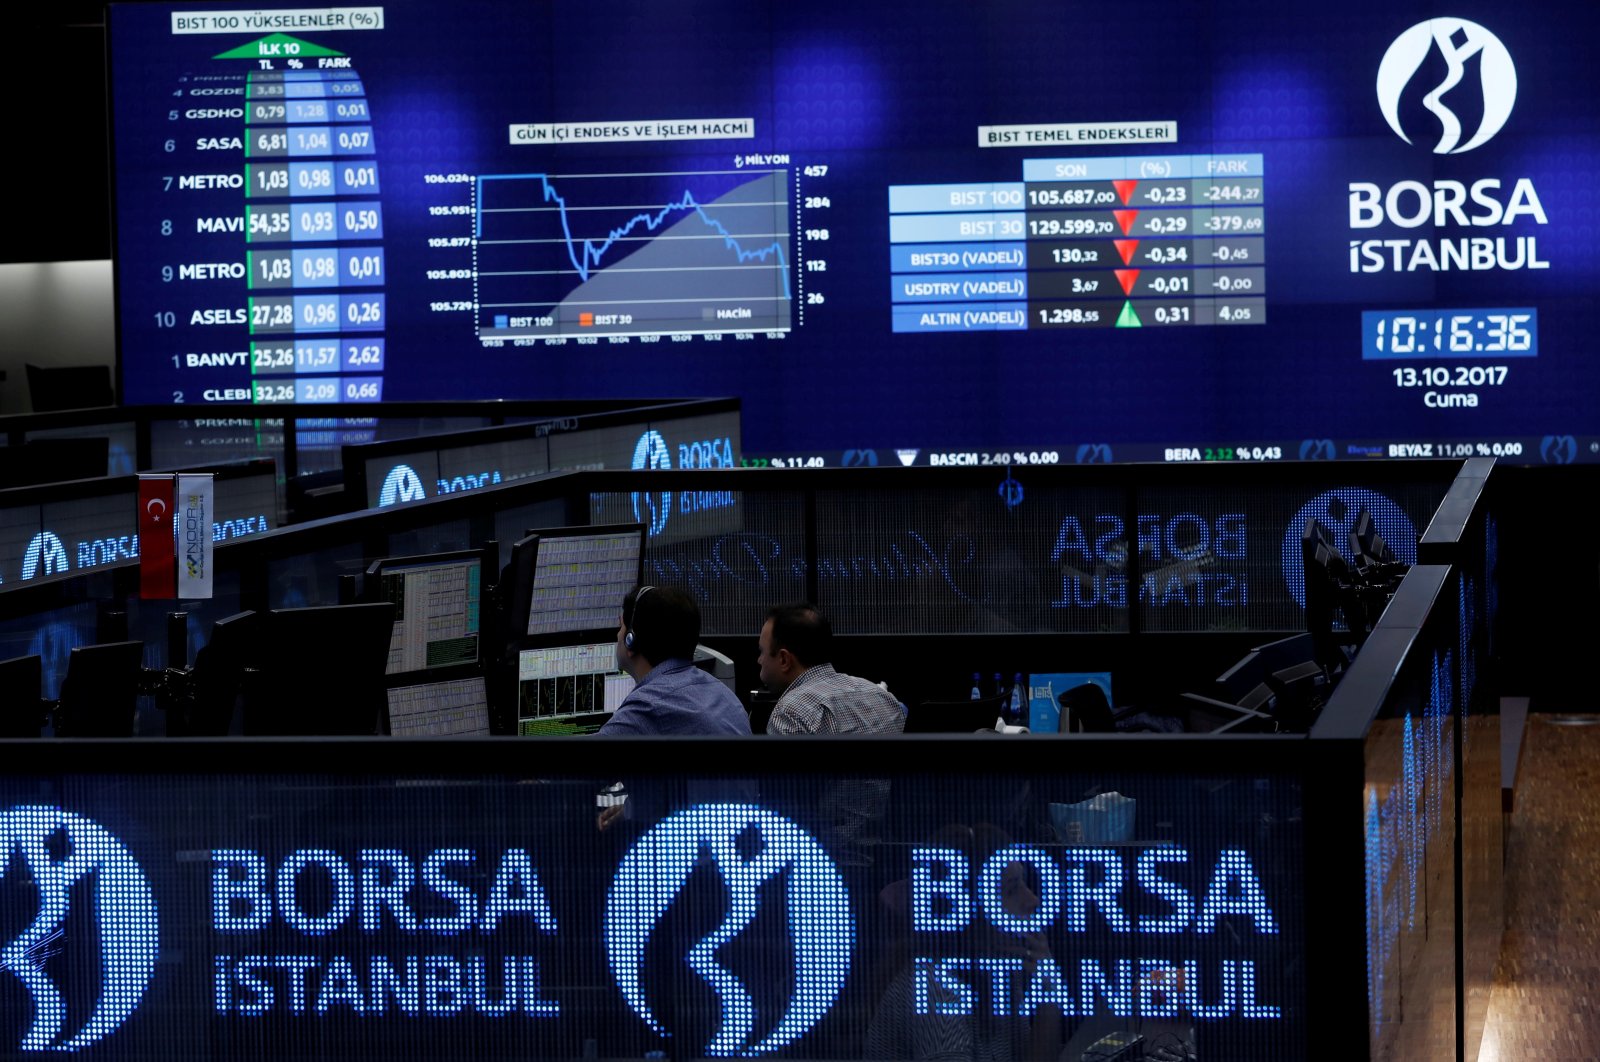 Traders work at their desks on the floor of the Borsa Istanbul Stock Exchange in Istanbul, Türkiye, Oct. 13, 2017. (Reuters Photo)